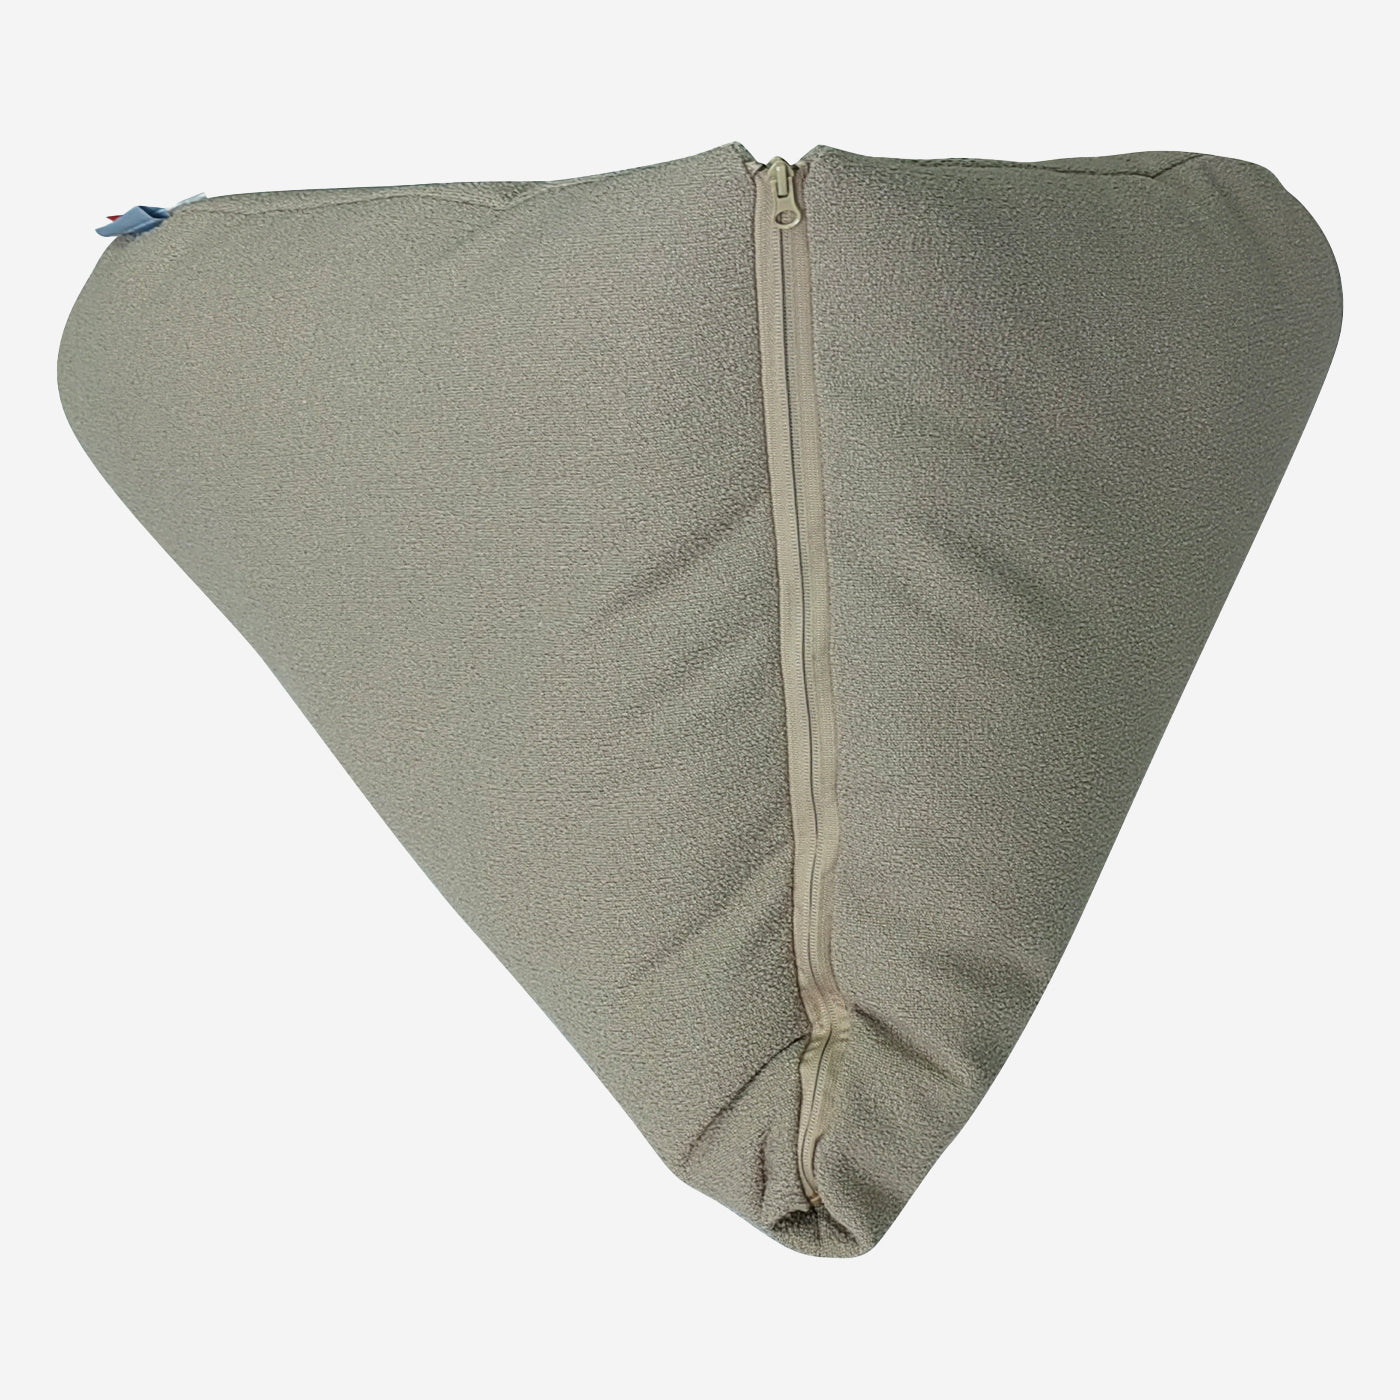 Luxury Dog Cushions & Beds, The Perfect Snuggly Cave For Dogs To Burrow! Available Now at Lords & Labradors